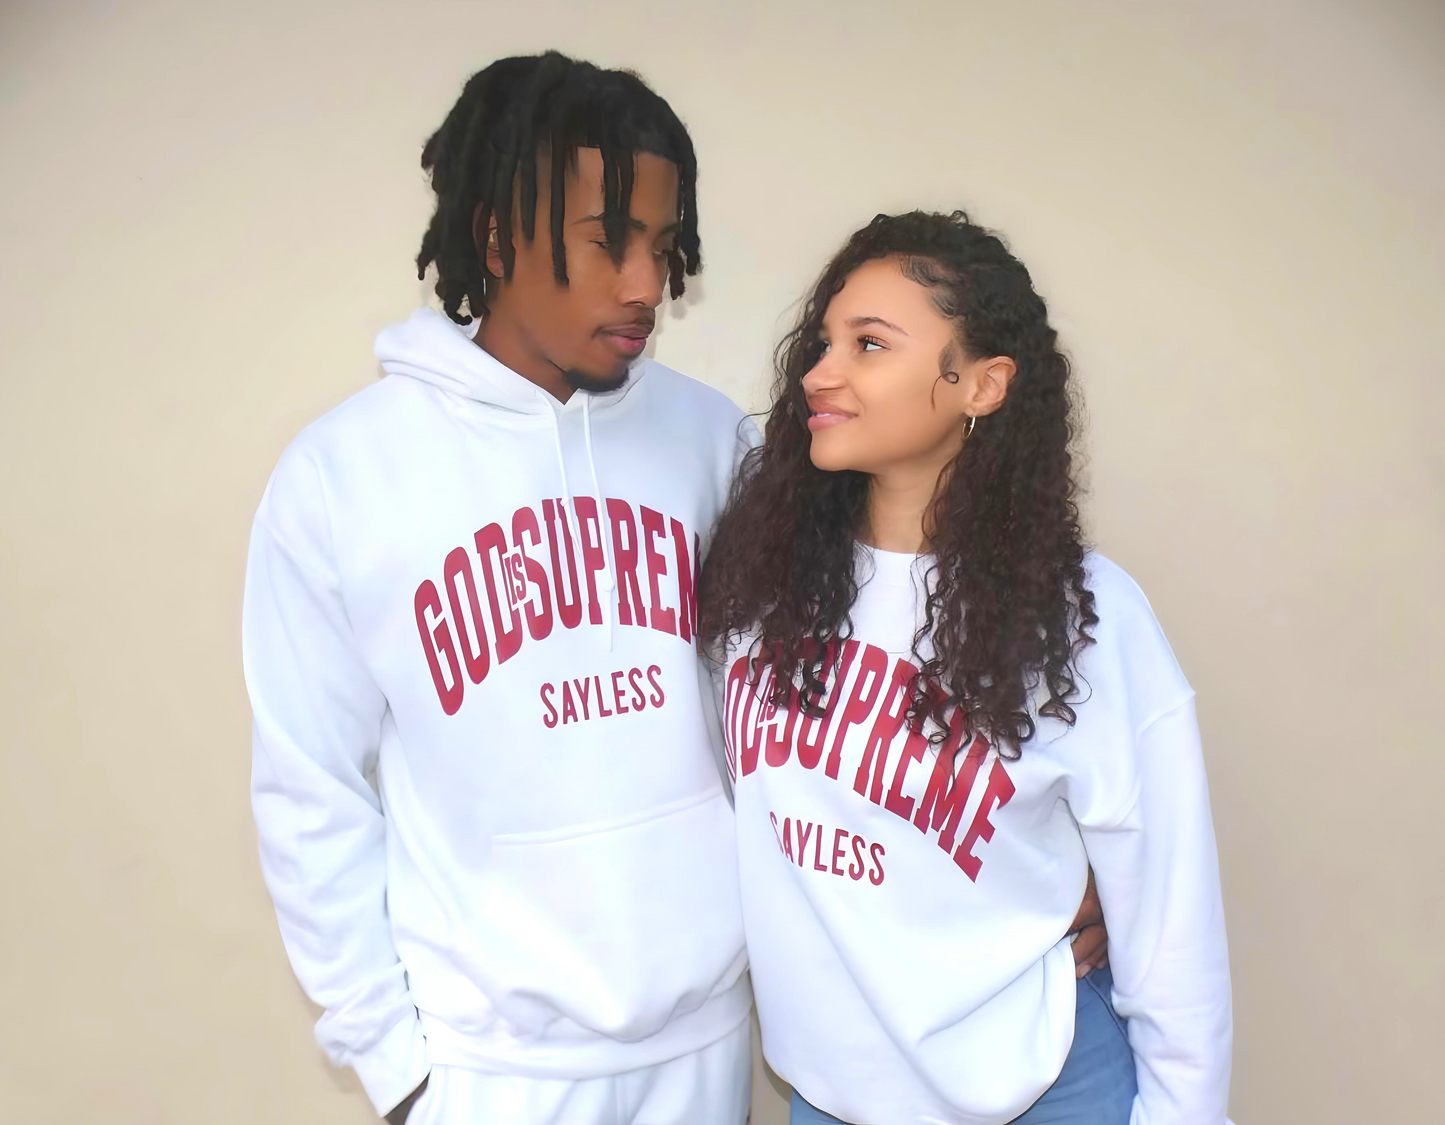 God is Supreme Sayless /Christian White and Red Hoodie